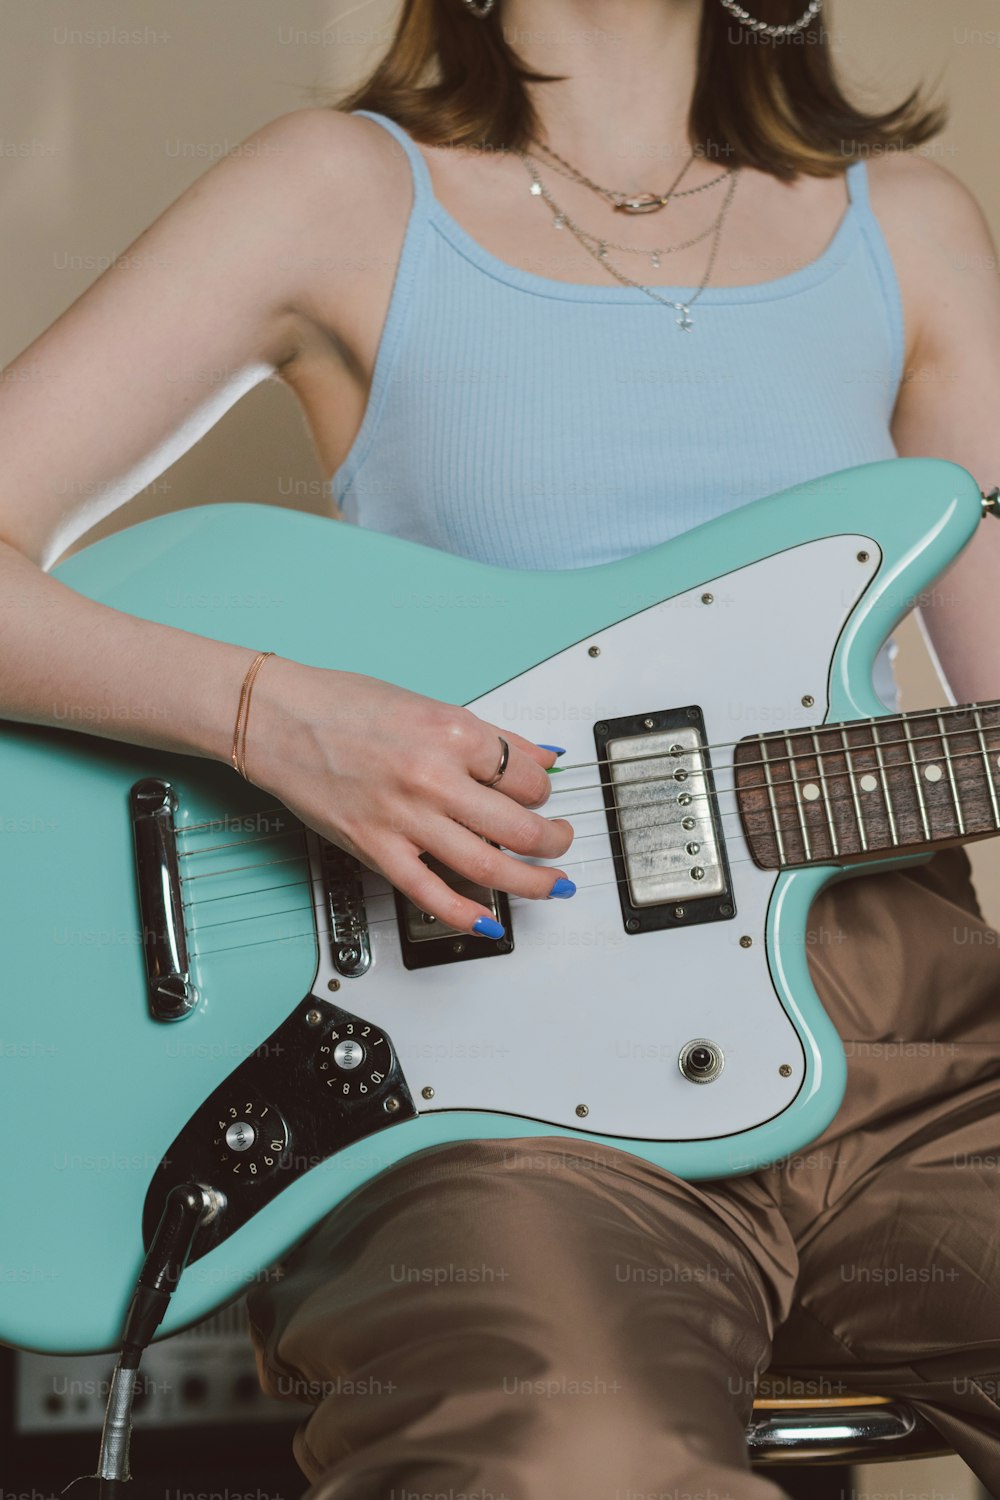 a woman sitting in a chair holding a blue guitar